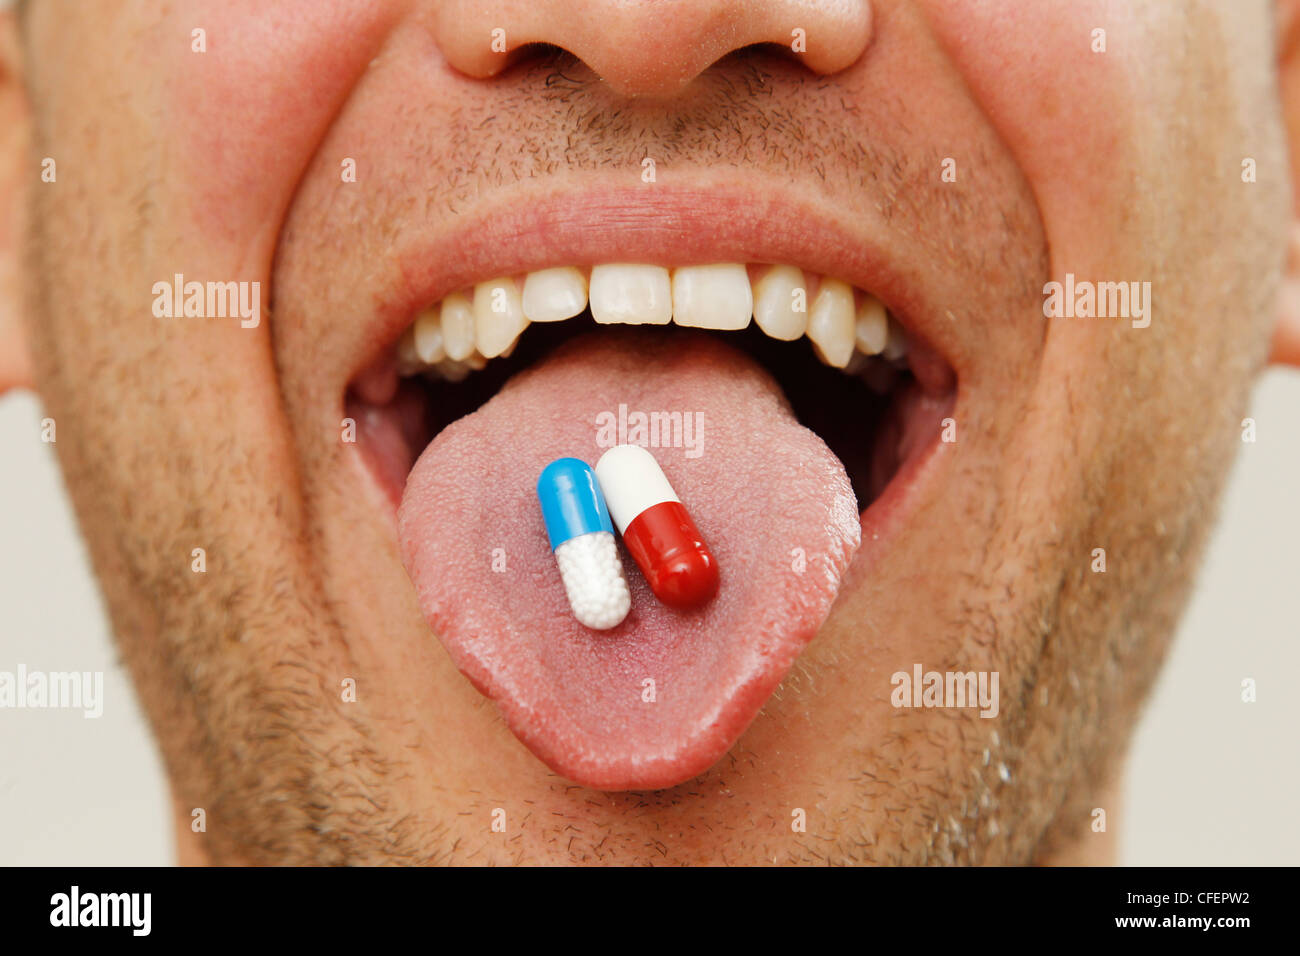 Medicine pills are administered by mouth, posed image Stock Photo